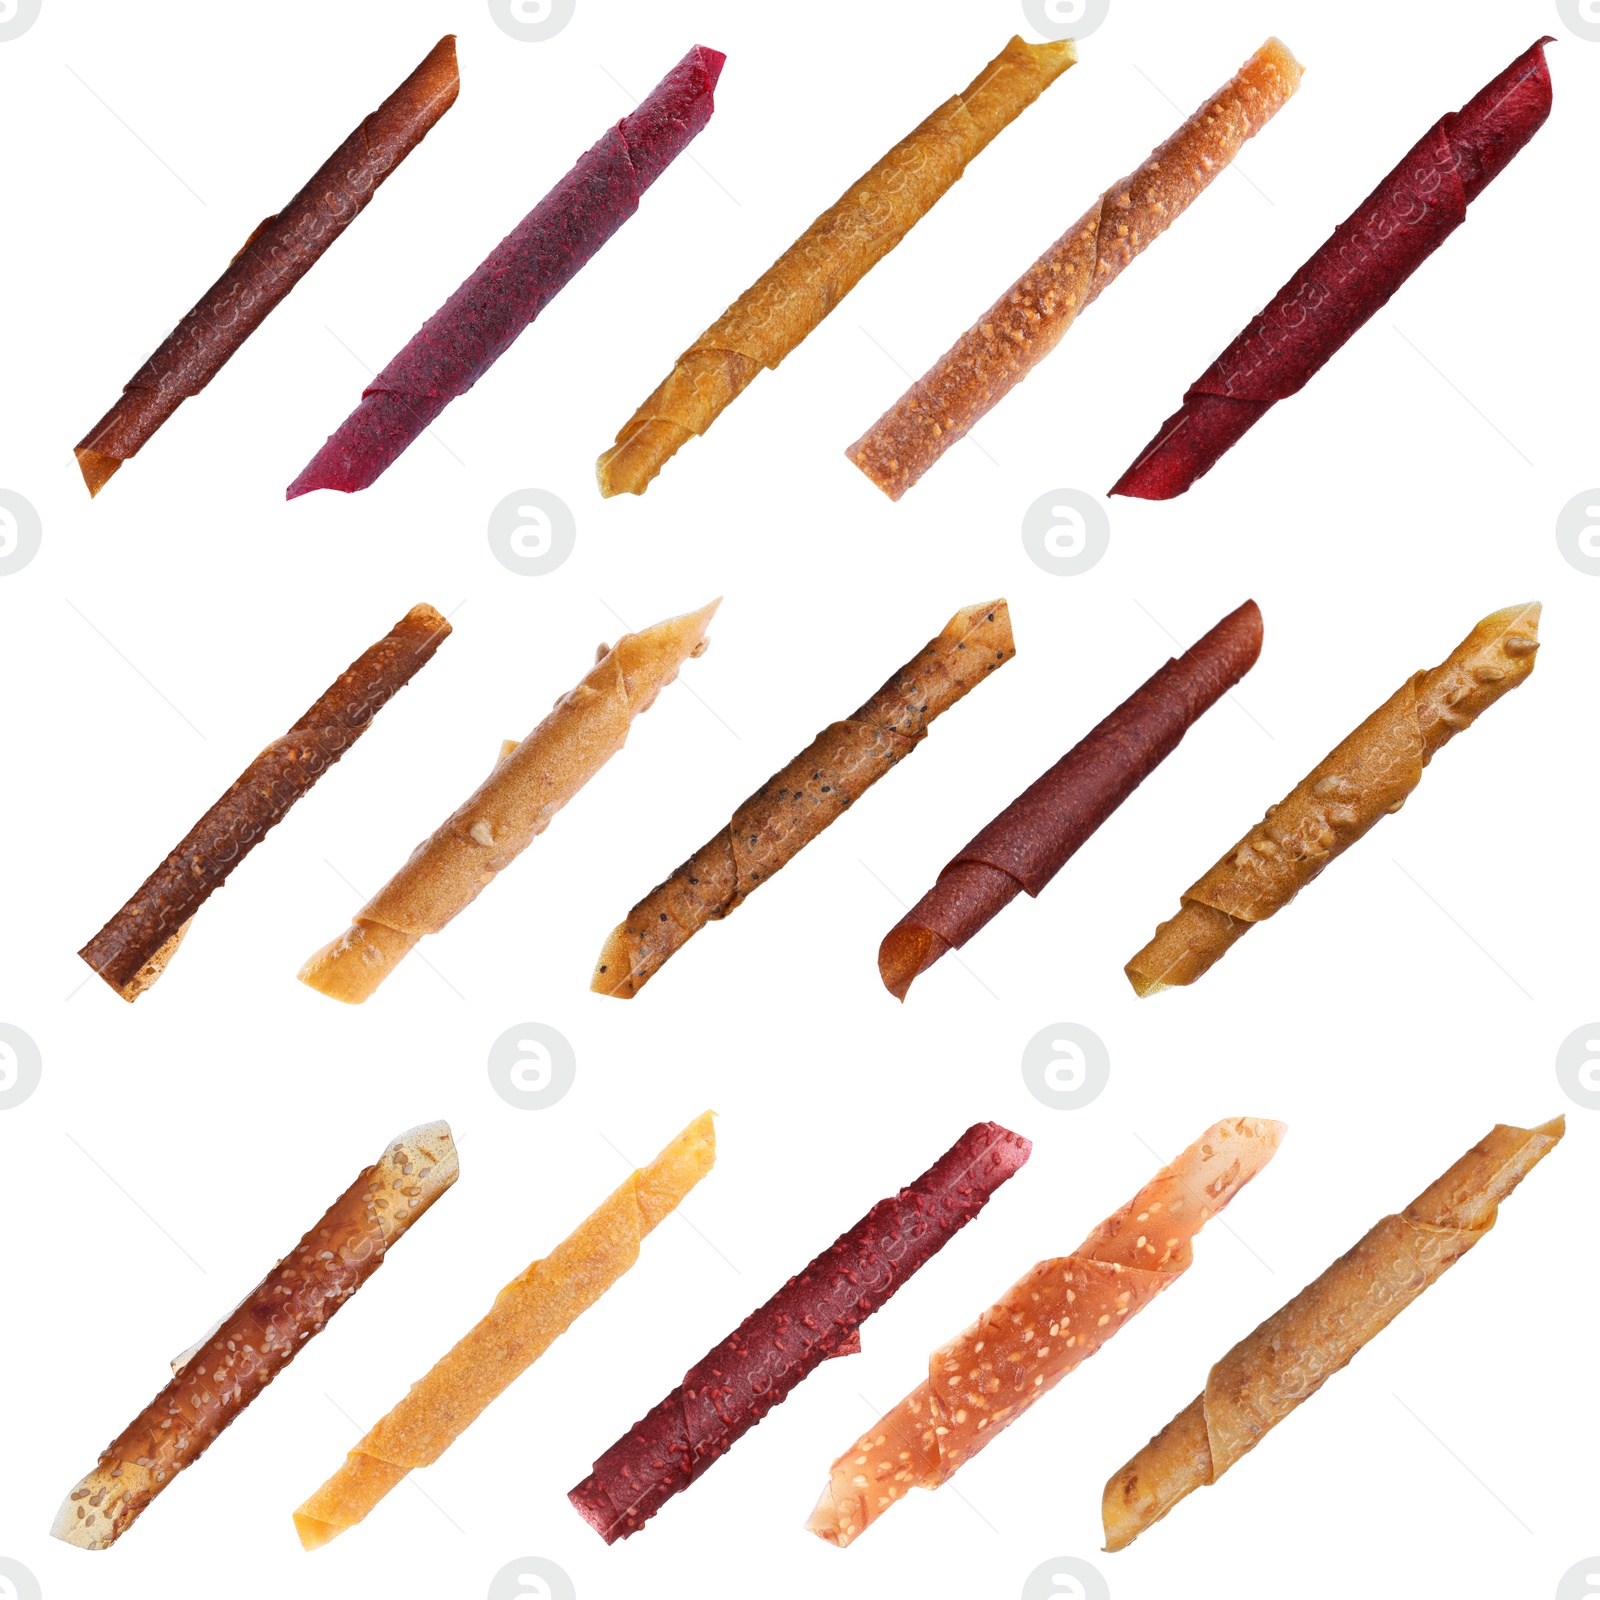 Image of Set with different delicious fruit leather rolls on white background